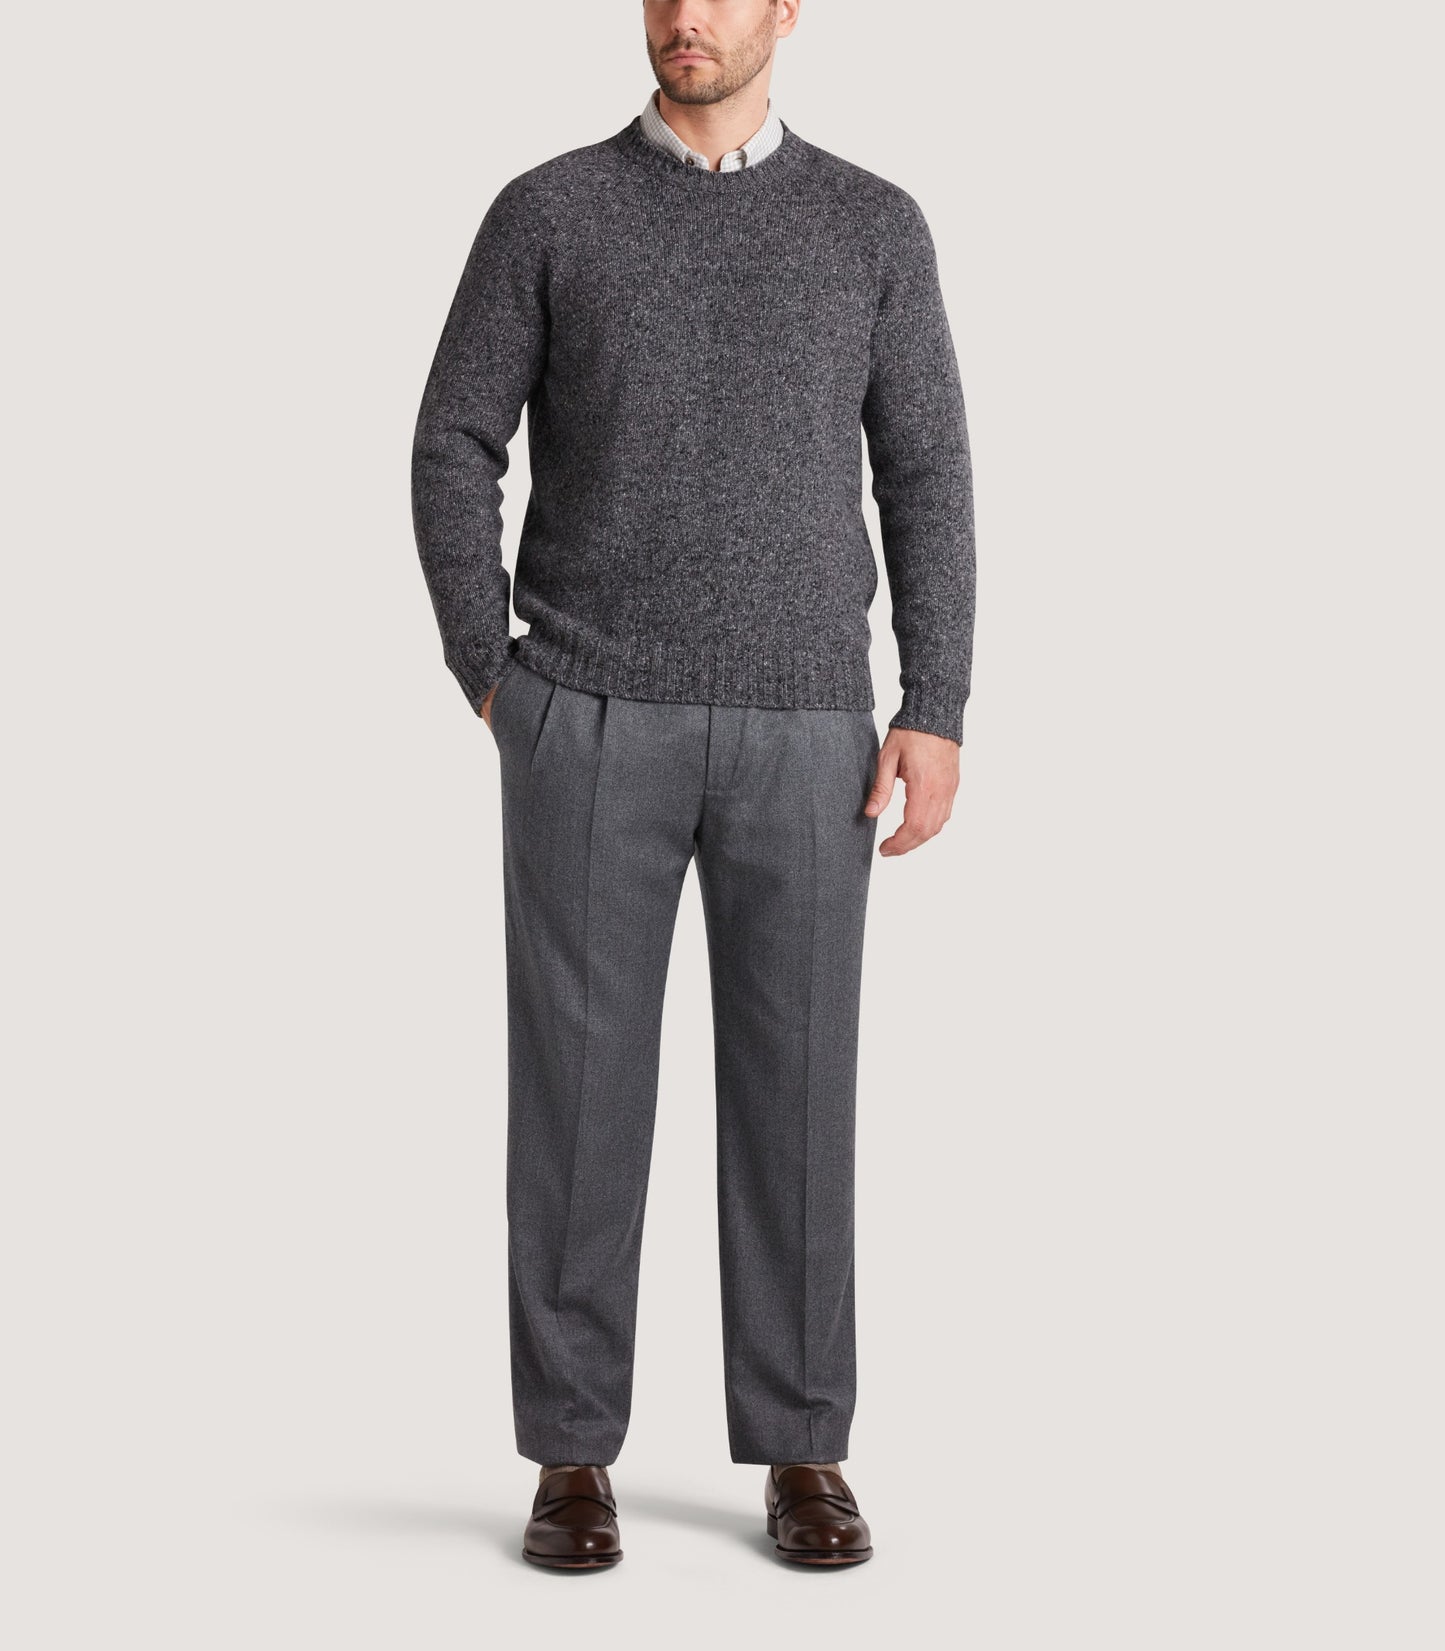 Men's Cashmere Donegal Seamless Crew Neck